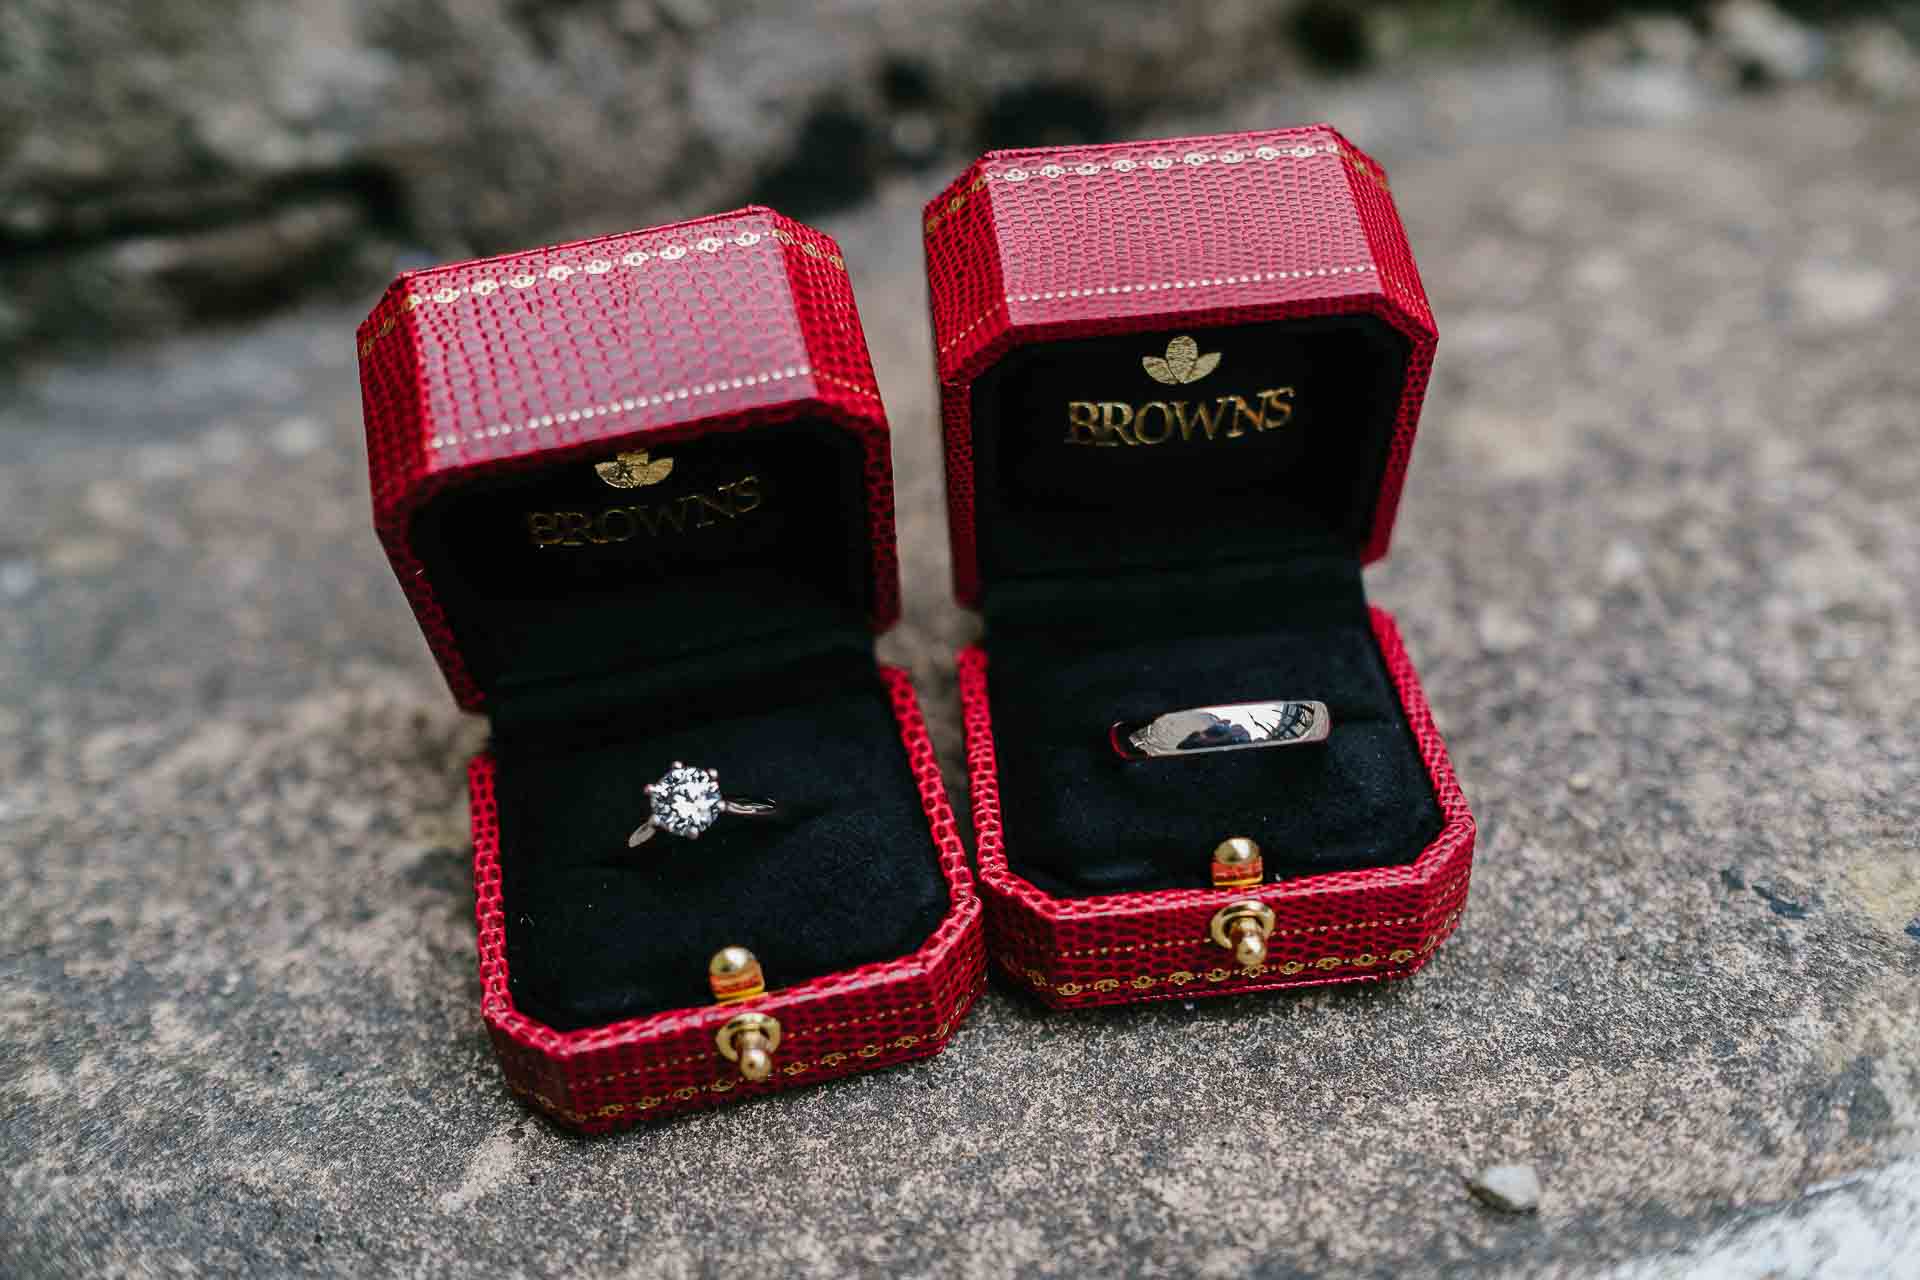 Adrian and Nadia's wedding rings in their red presentation boxes before the ceremony. Photography by Des Dubber Photography. Videography by Veiled Productions.